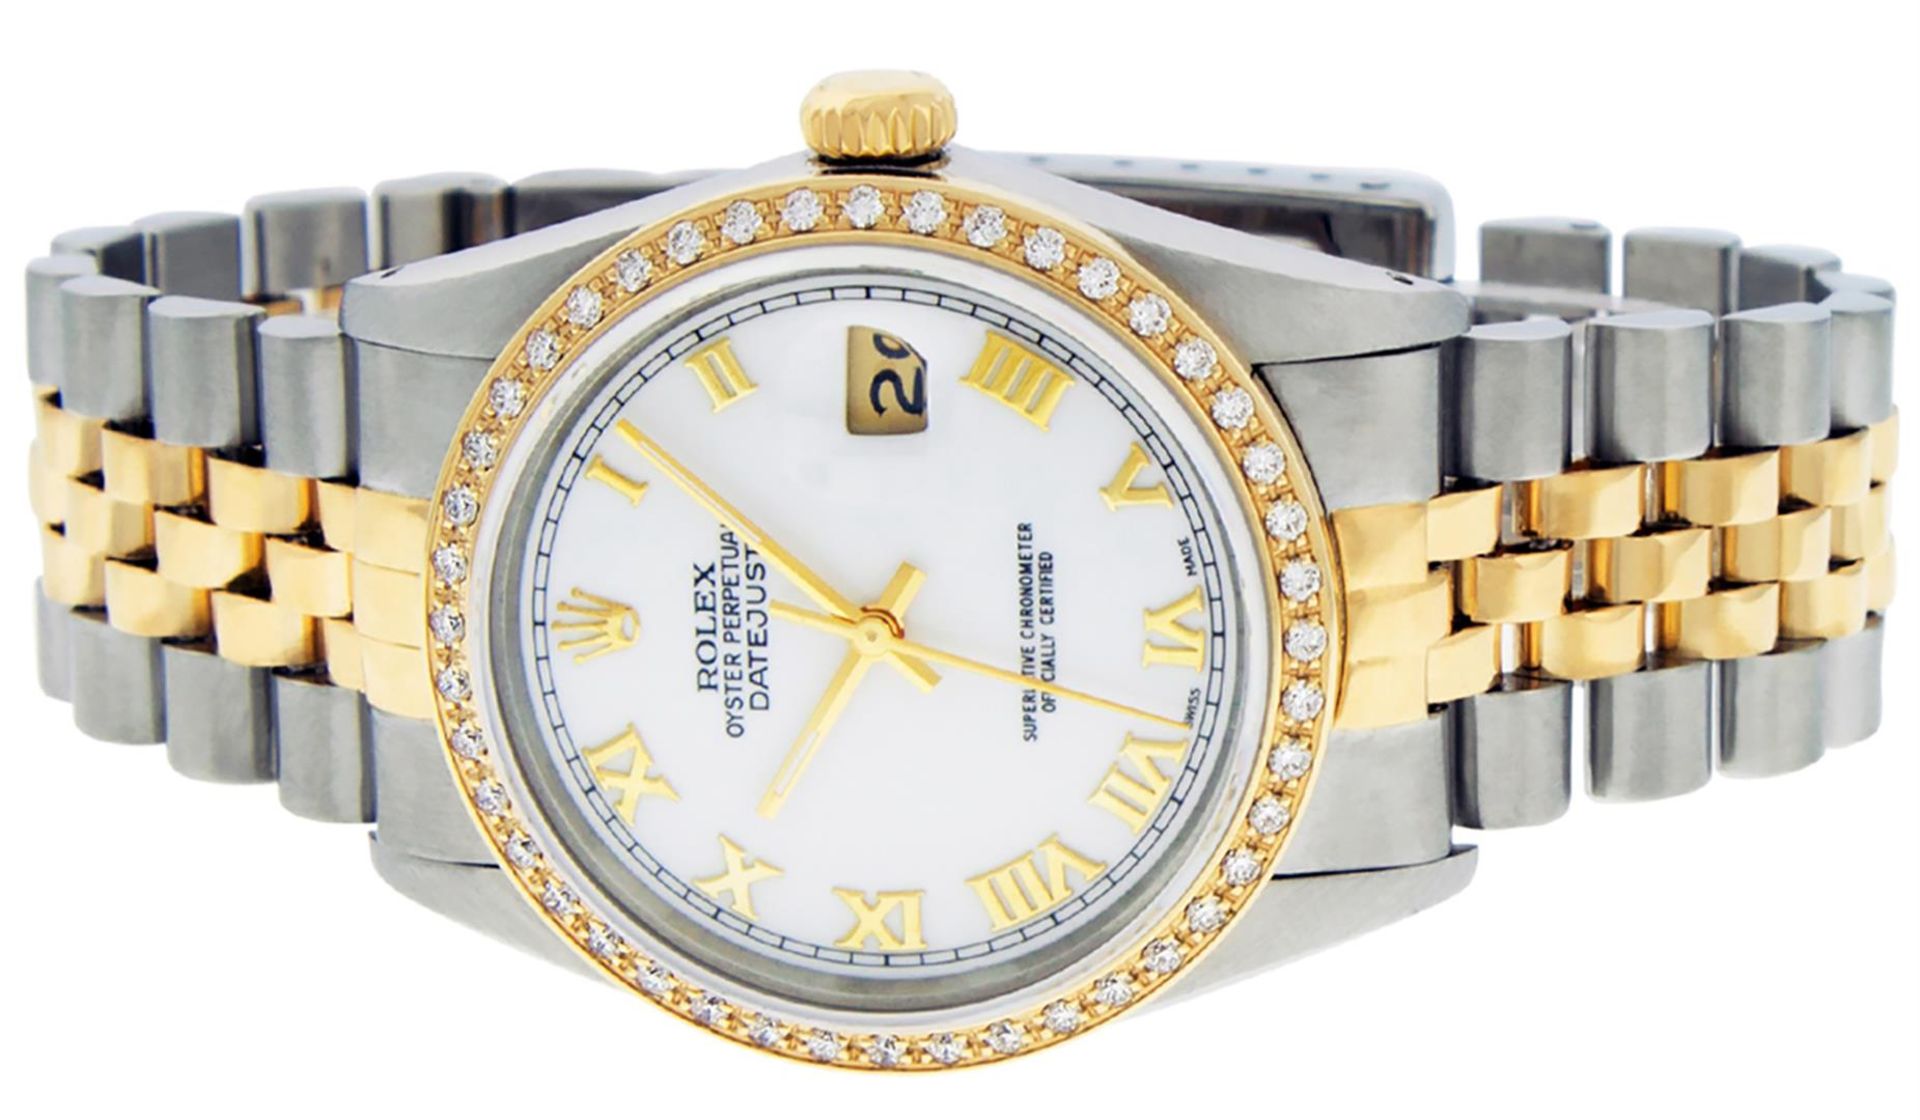 Rolex Mens 2 Tone Mother Of Pearl Diamond 36MM Datejust Wristwatch - Image 6 of 8